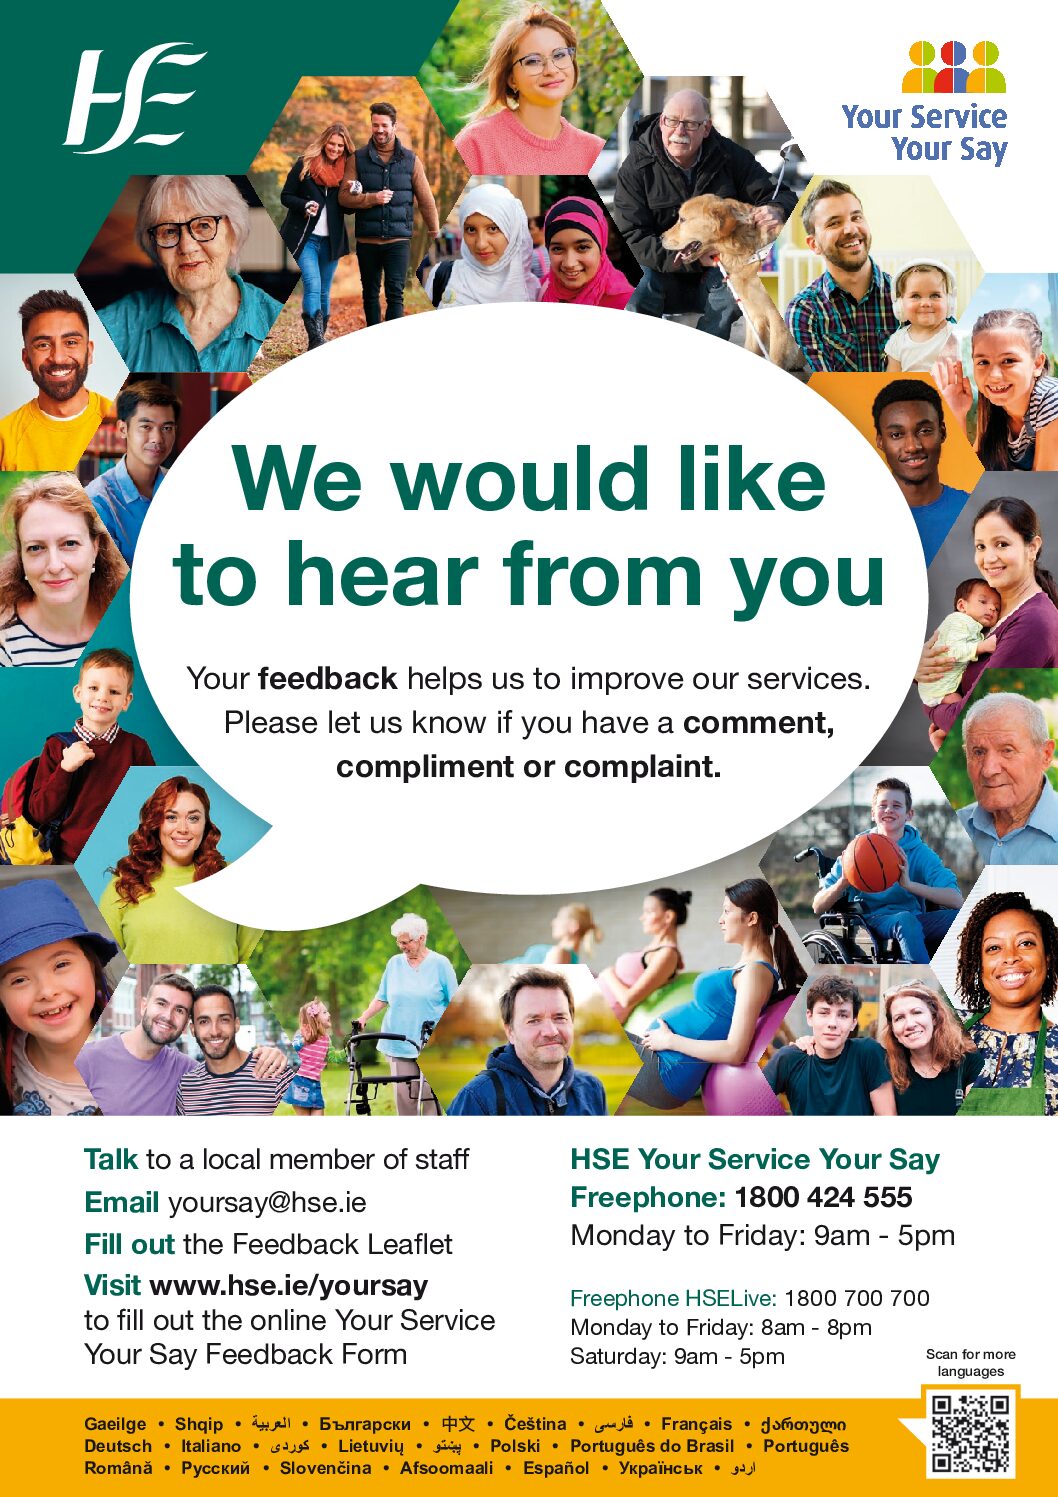 HSE- Your Service Your Say – YSYS new contact numbers & resources